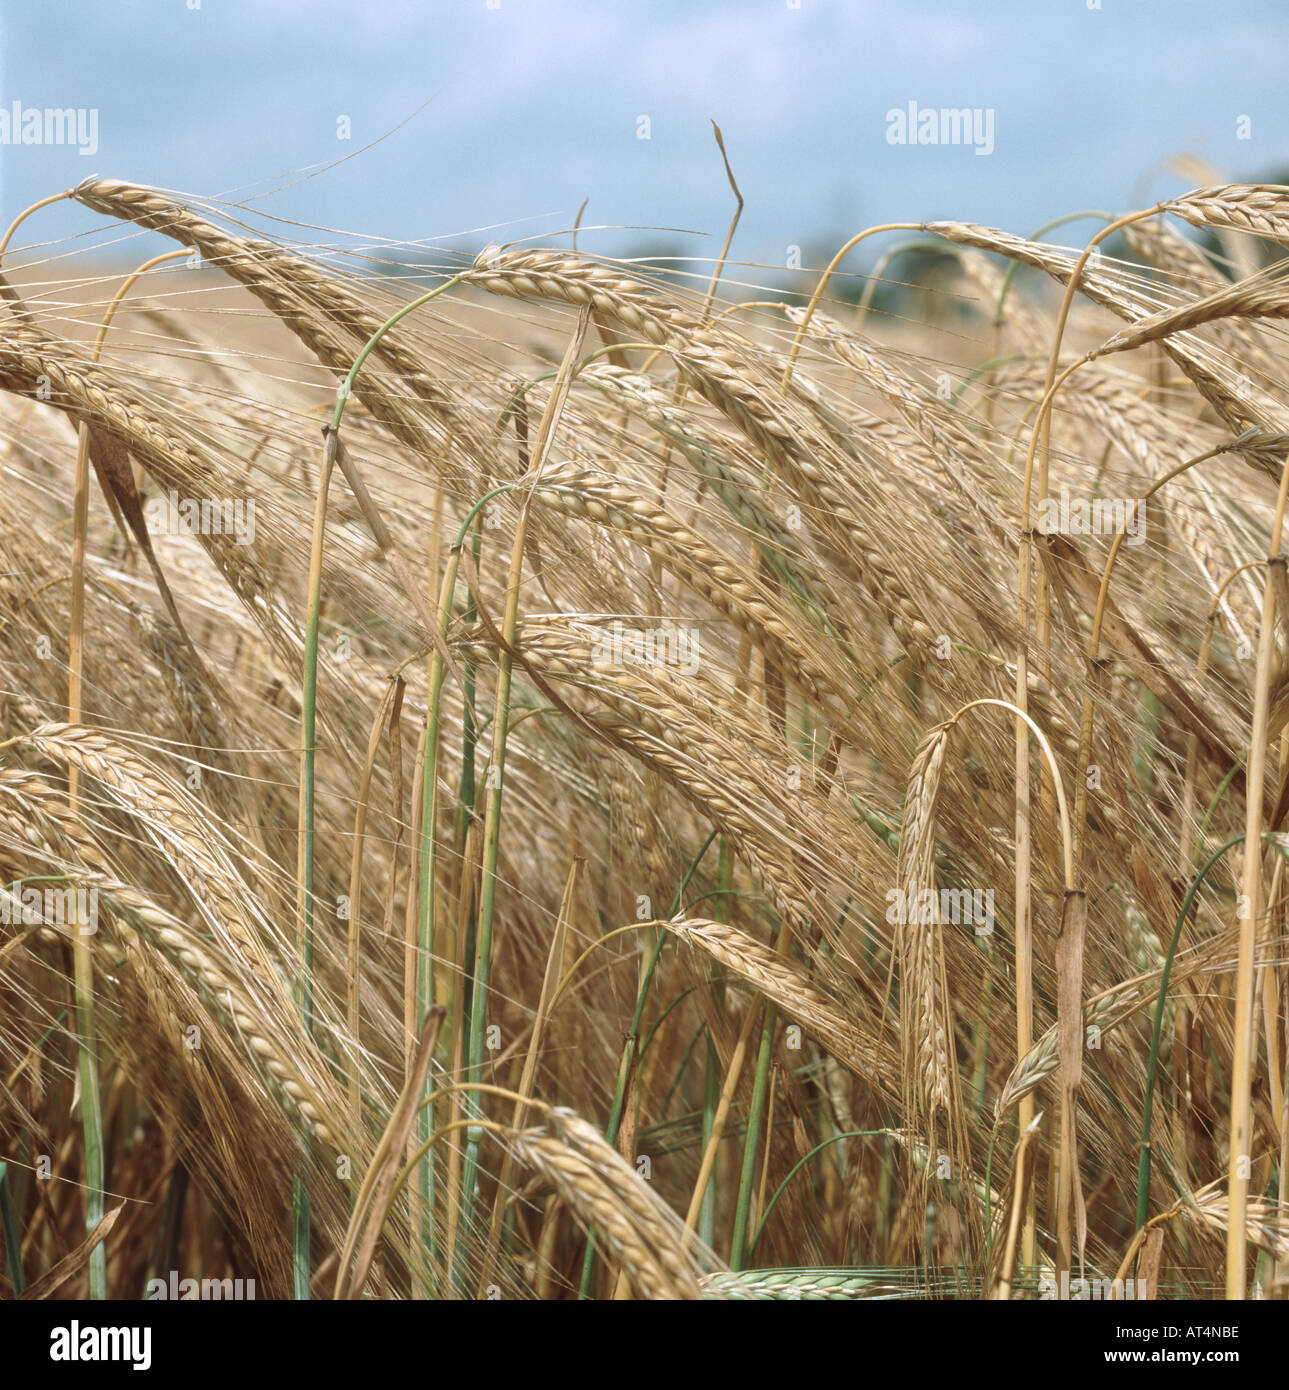 Ripening ears of two row barley with stems still slightly green Stock Photo